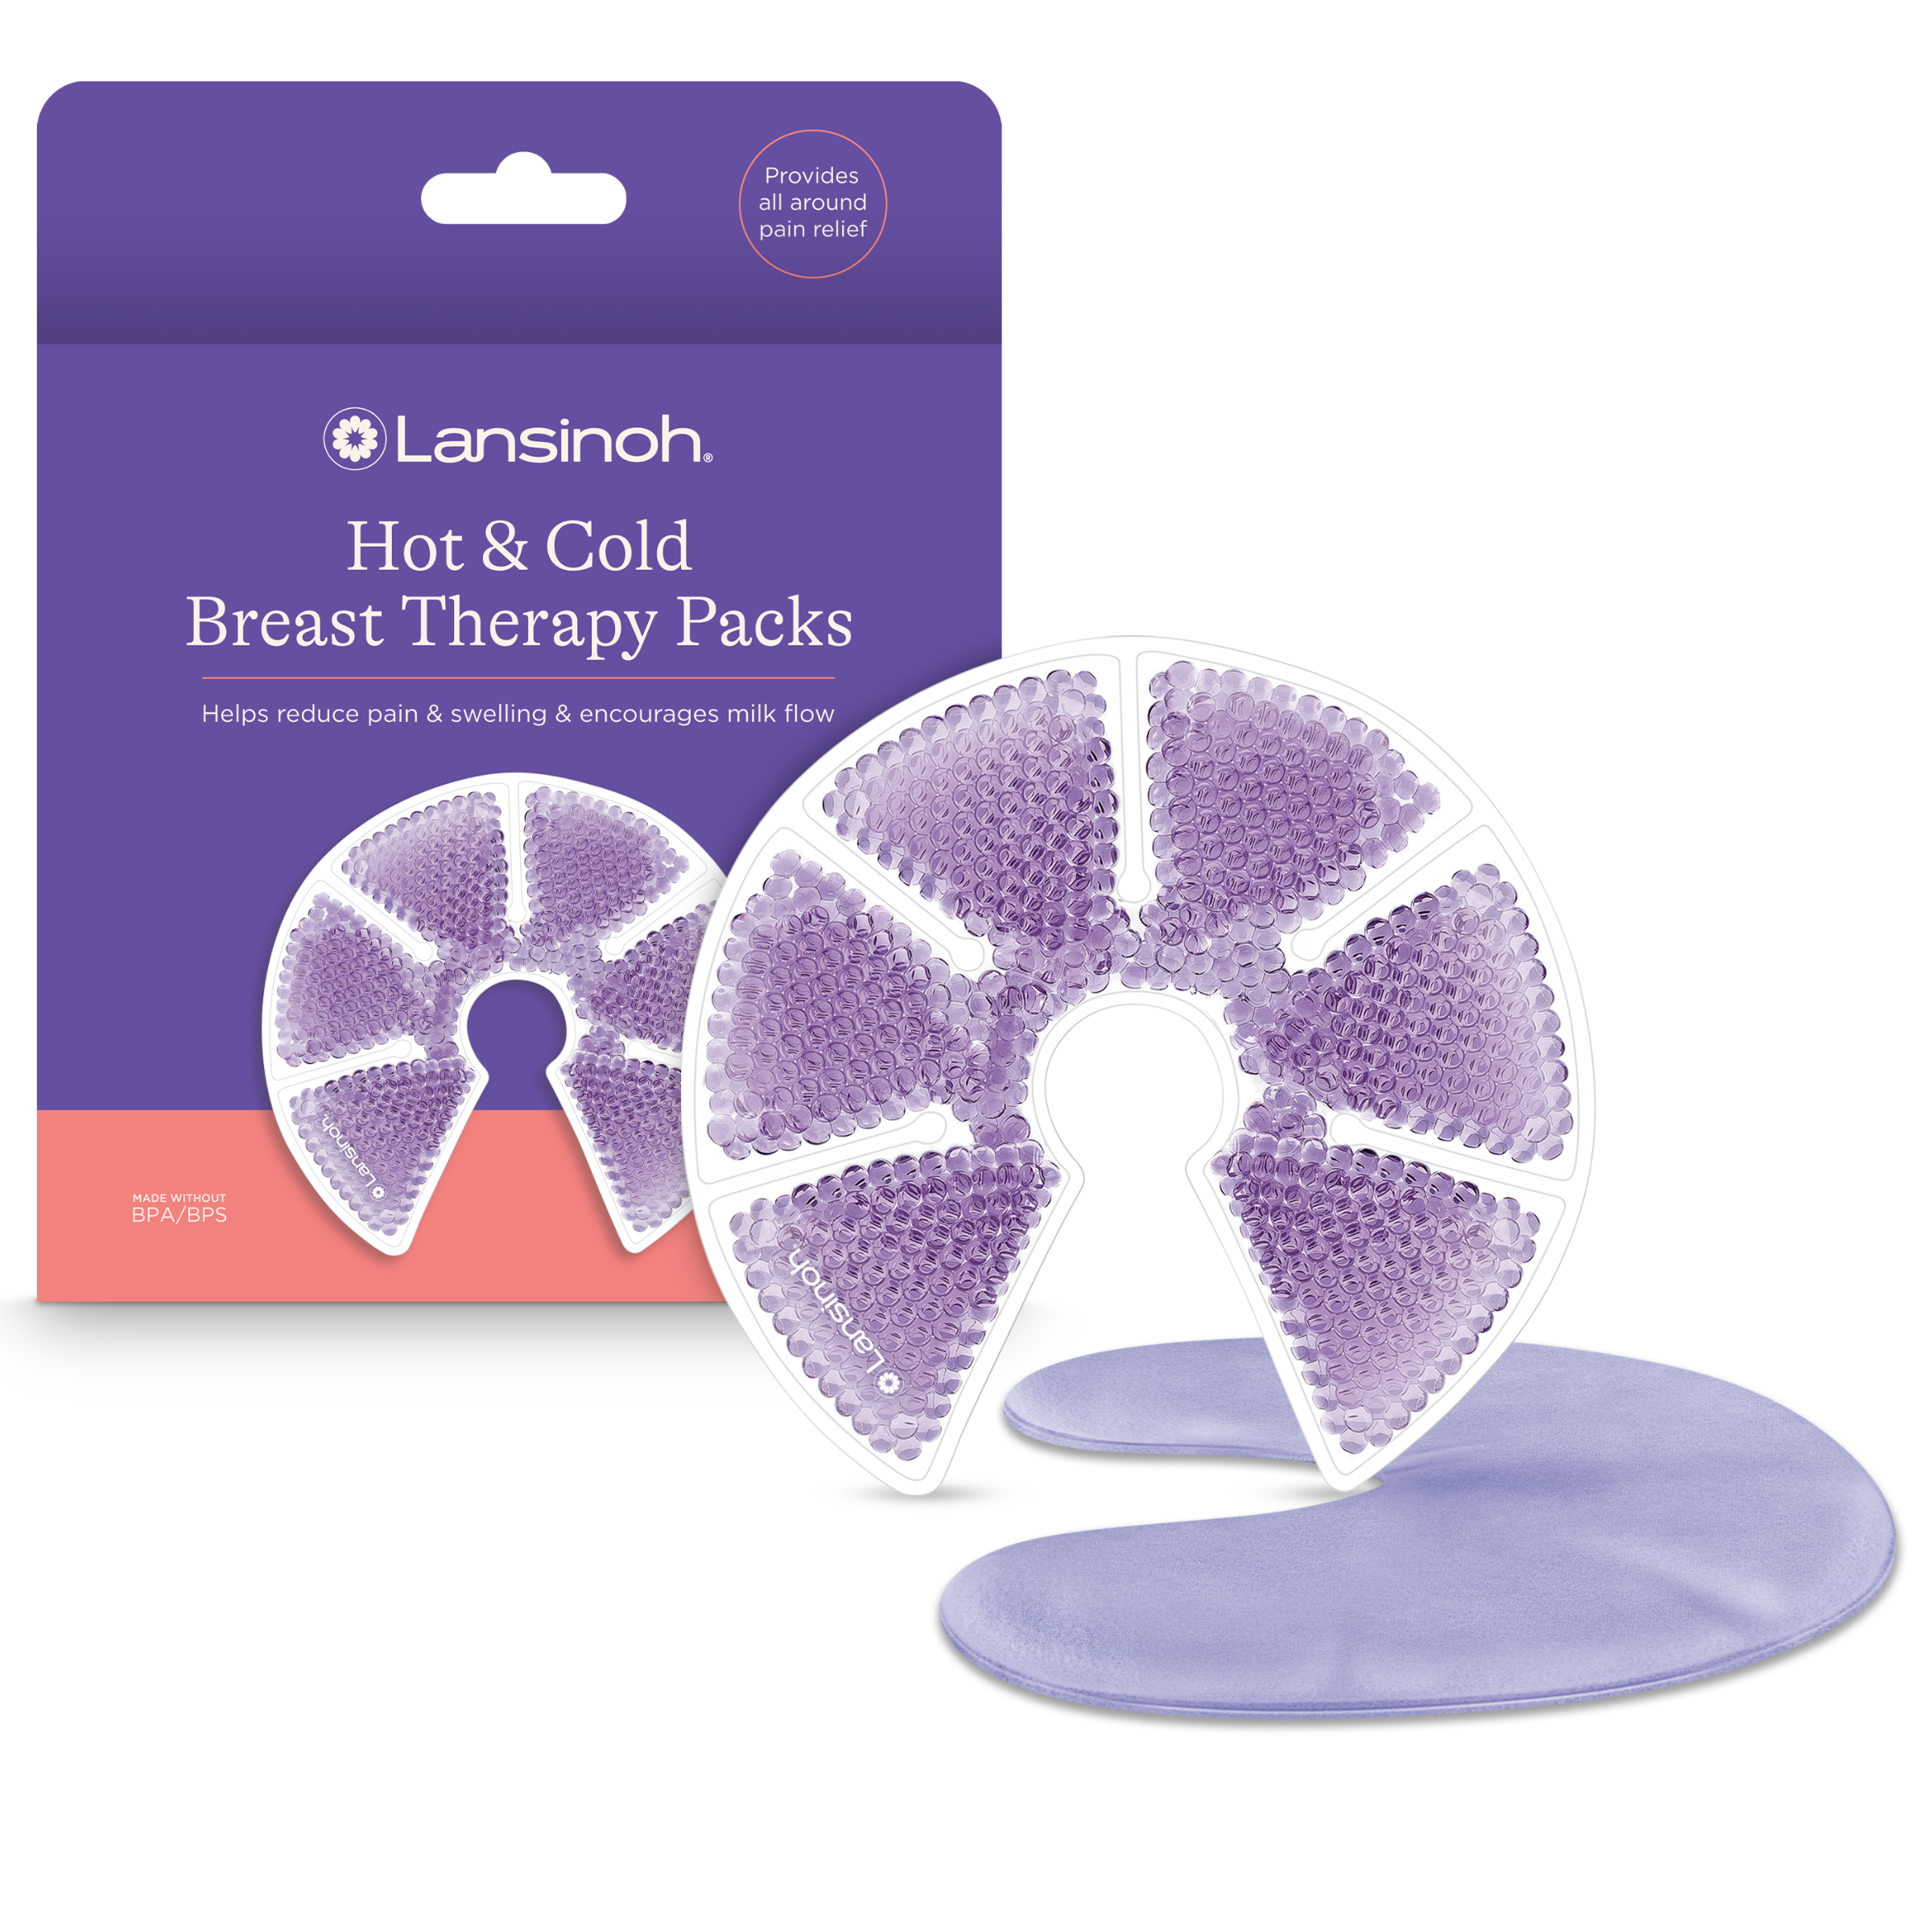 Lansinoh Hot & Cold Breast Therapy Packs with Covers, 2 Pack - image 1 of 13